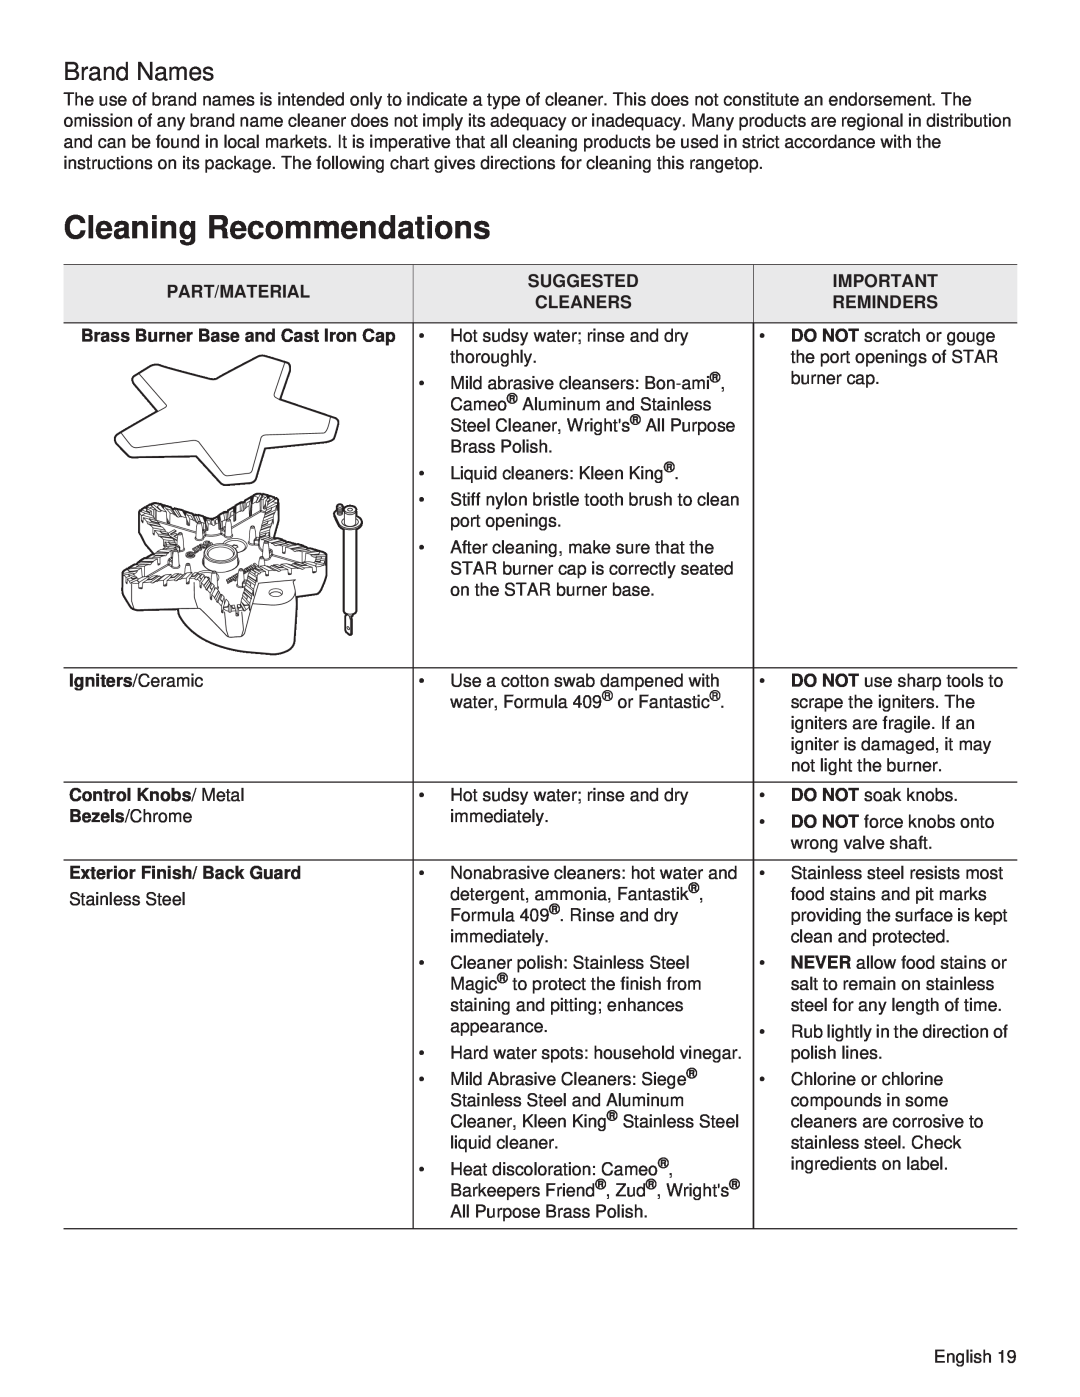 Thermador PCG36, PCG48, PCG30 manual Cleaning Recommendations, Brand Names 